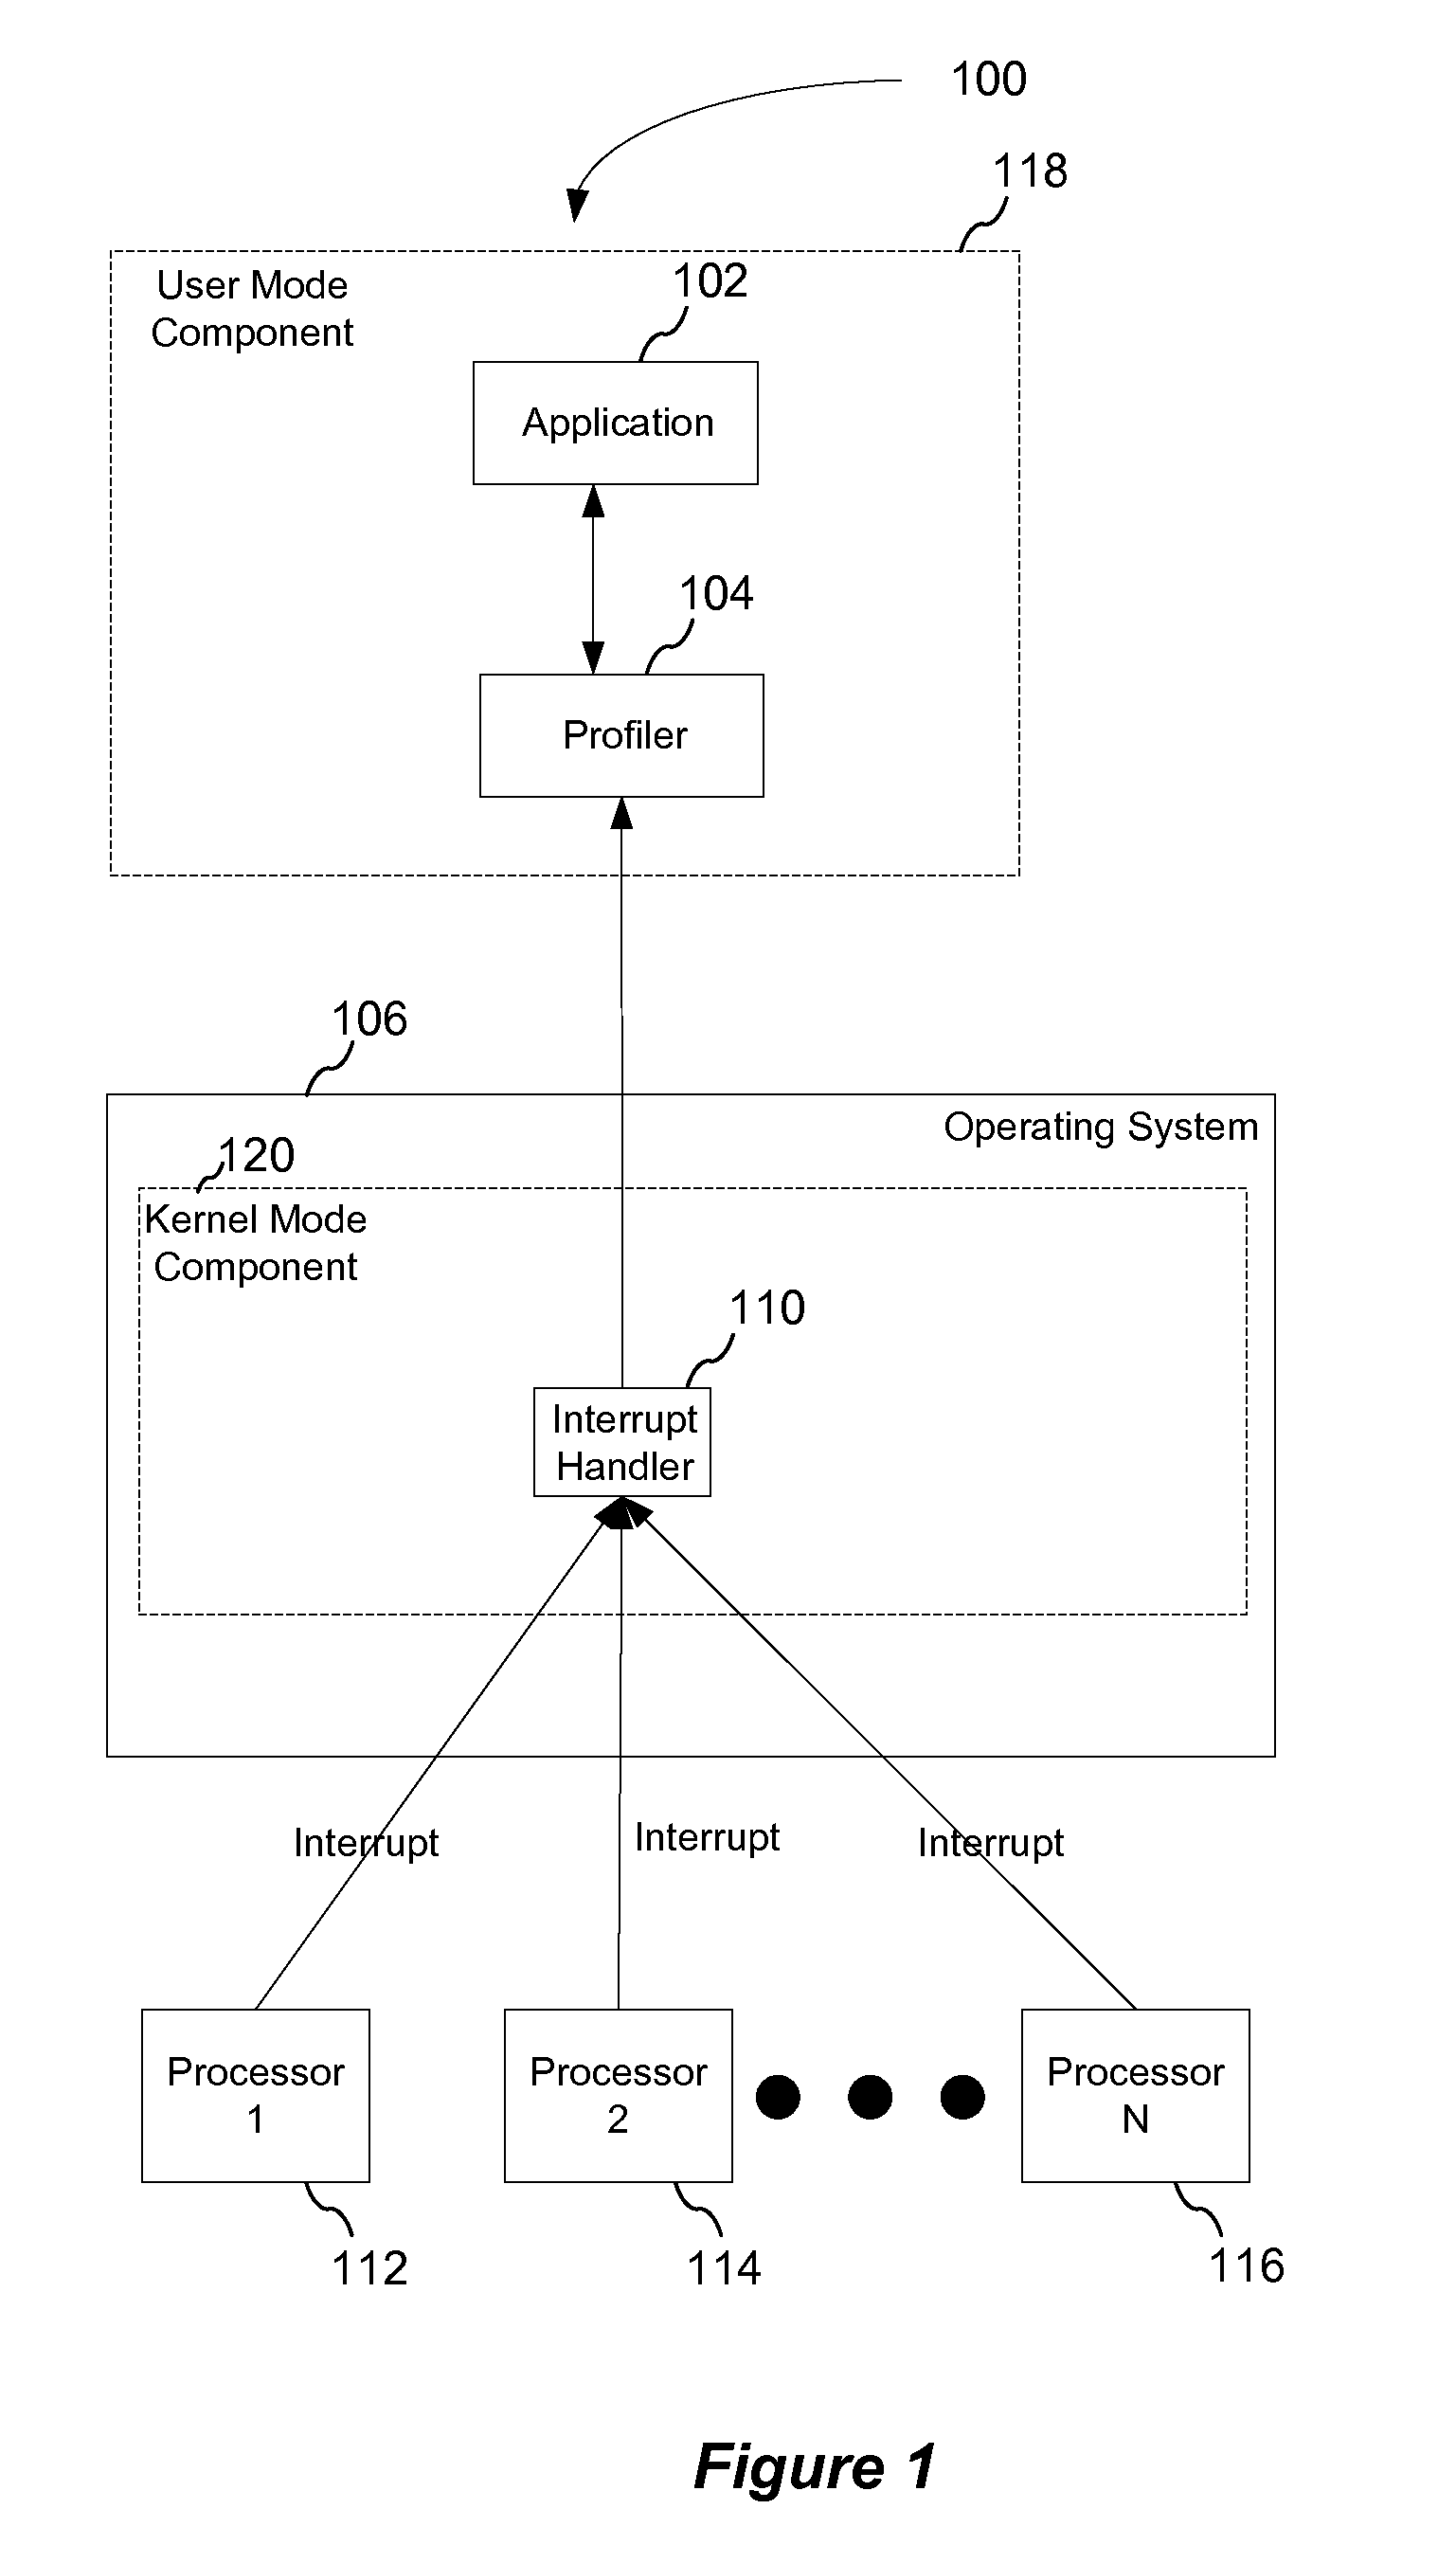 Performing call stack sampling by setting affinity of target thread to a current process to prevent target thread migration